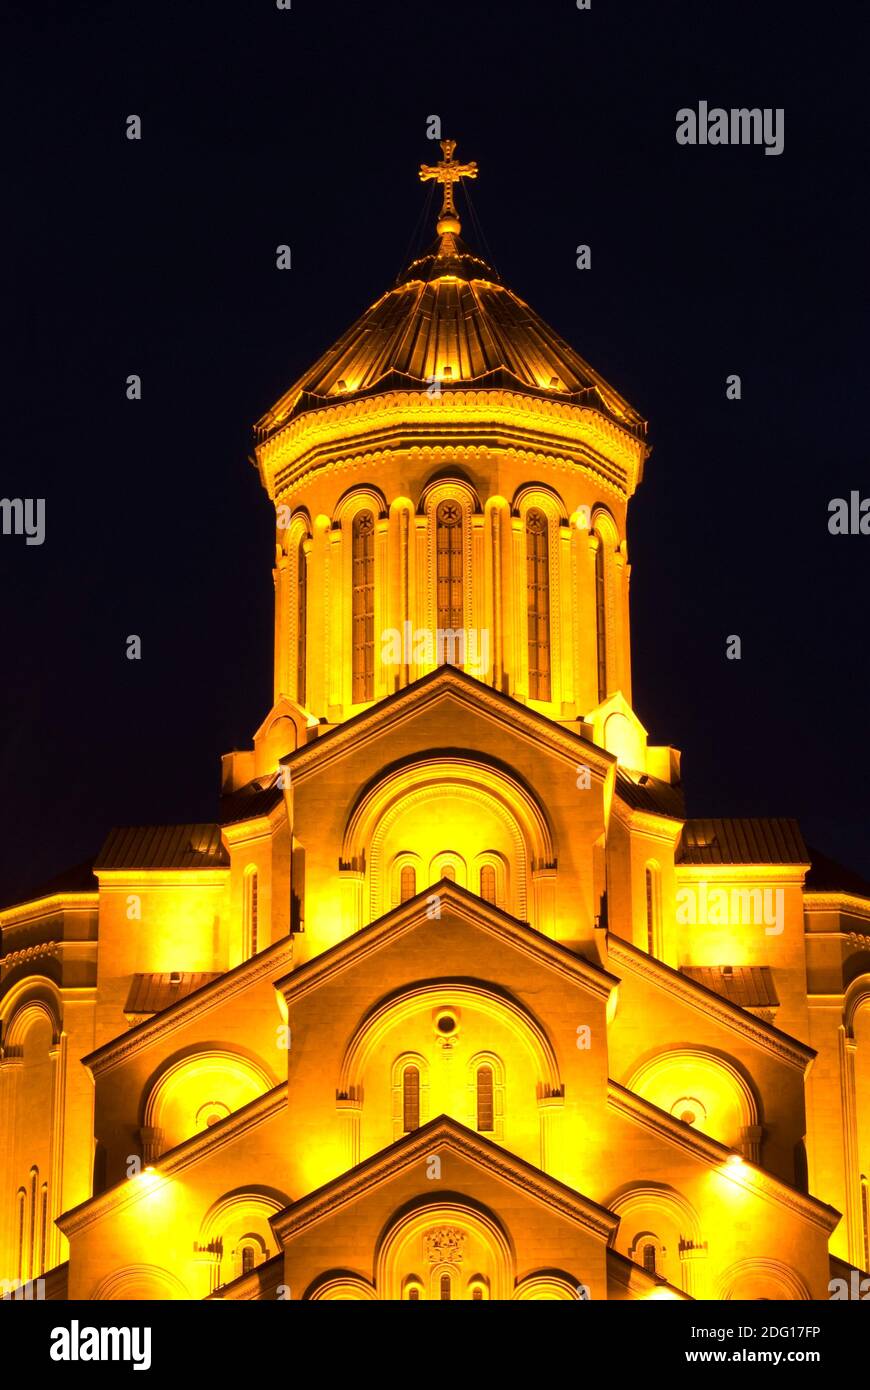 The Tbilisi Holy Trinity Cathedral commonly known as Sameba is the main Georgian Orthodox Christian cathedral, located in Tbilisi. Georgia Stock Photo